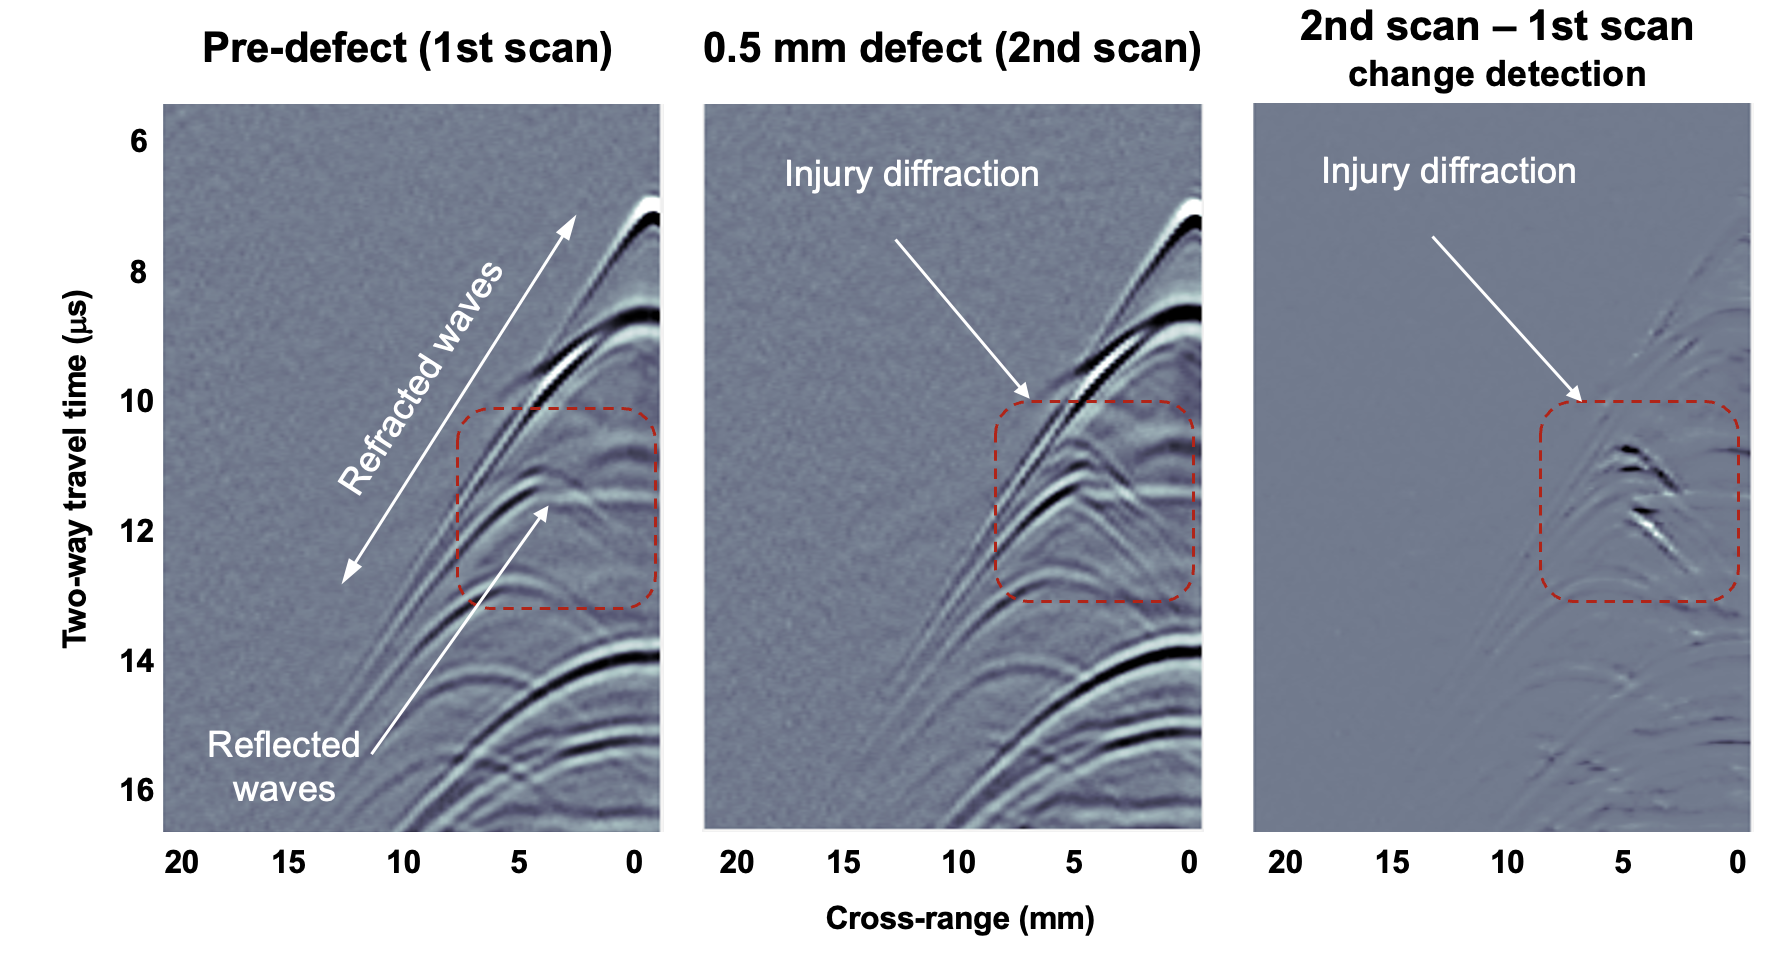 Before-and-after Noncontact Laser Ultrasound images of a bone/tissue phantom show a 0.5 mm defect on the bone surface.